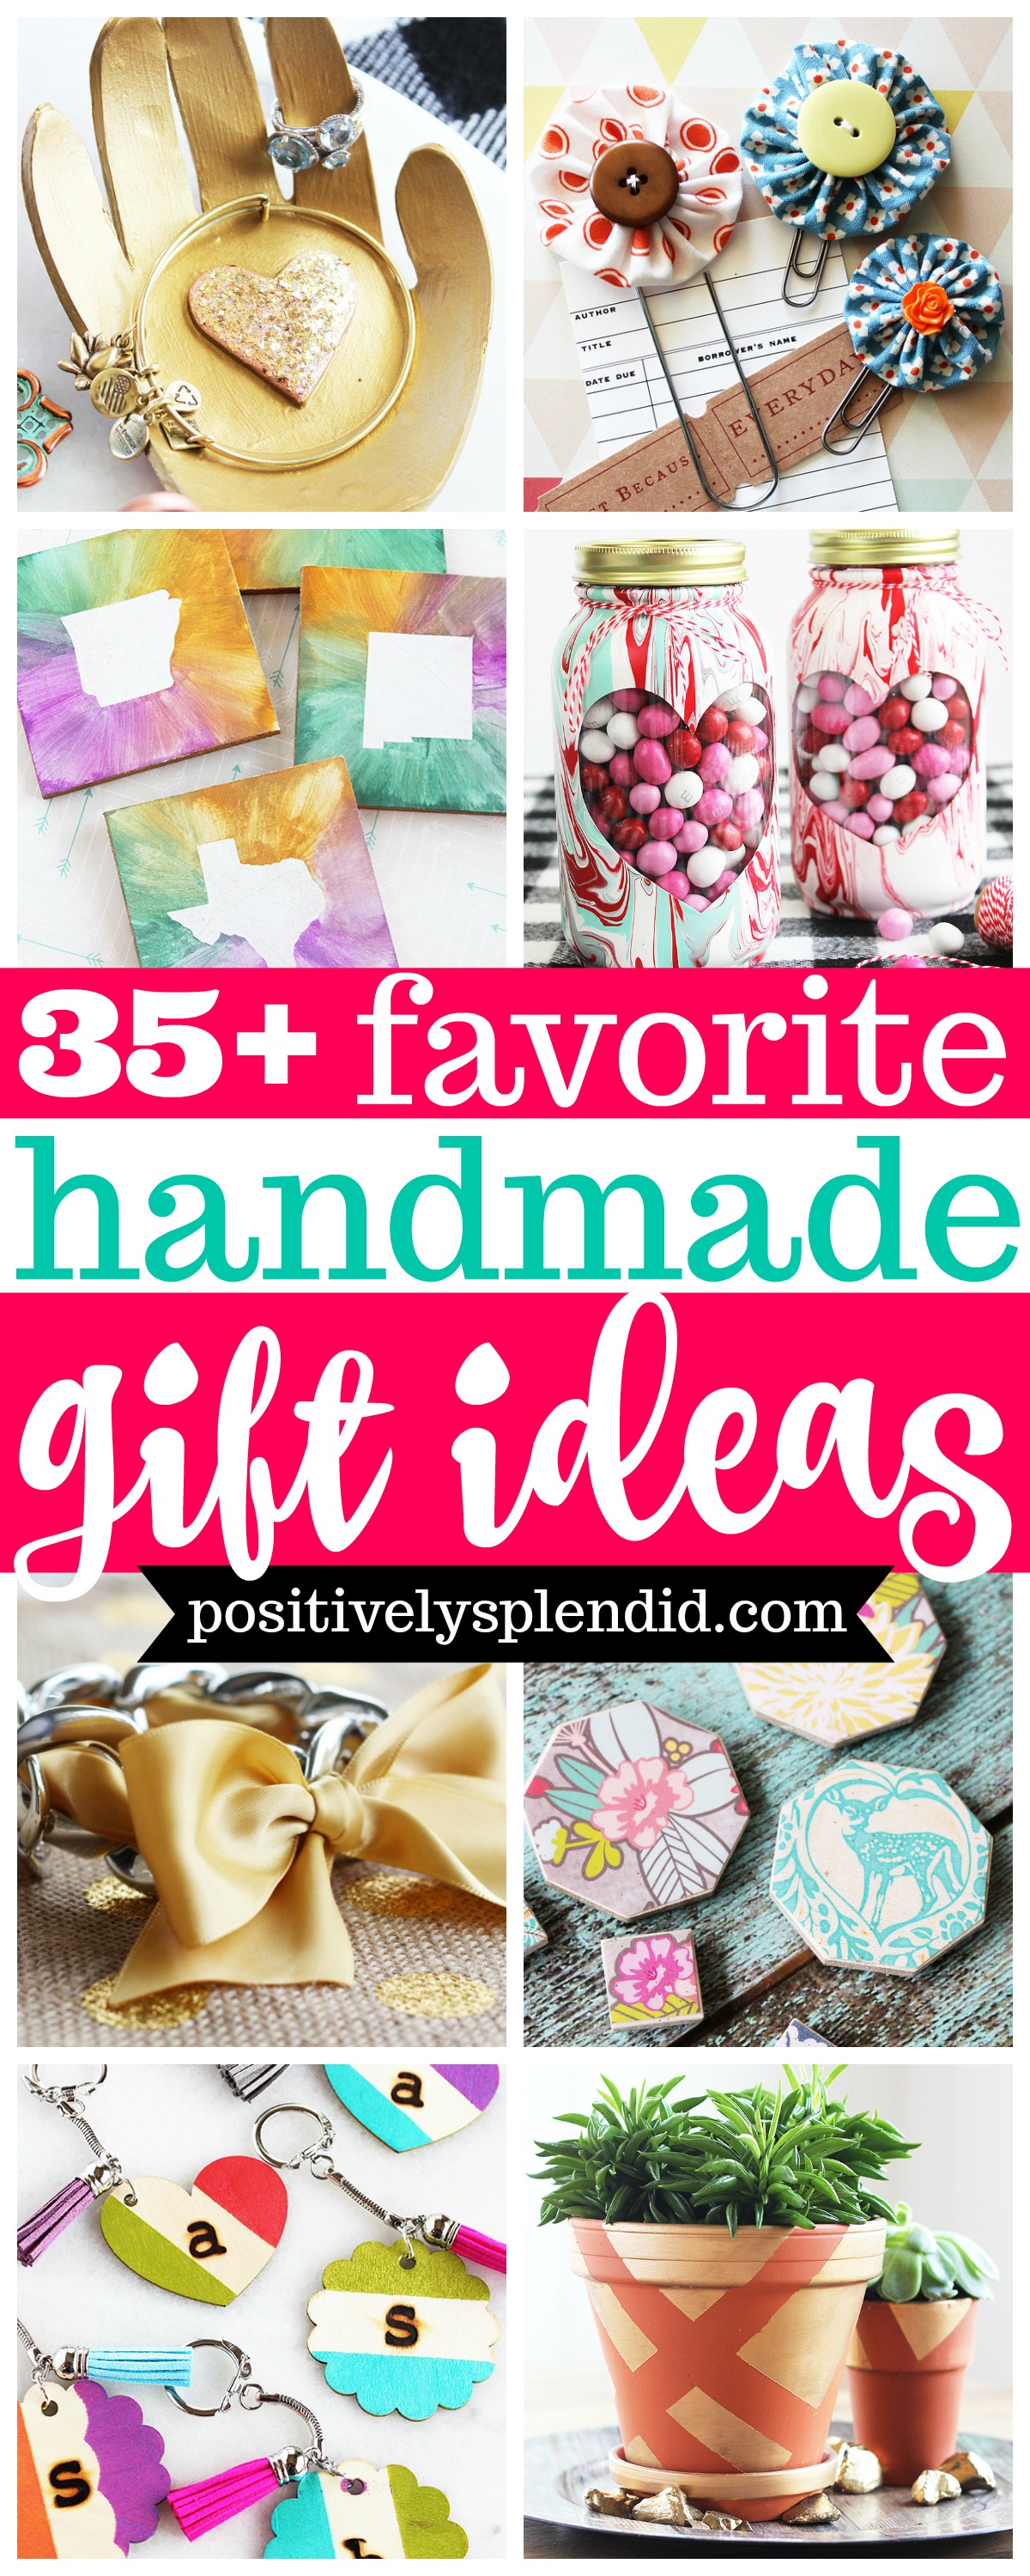 35-best-homemade-gift-ideas-positively-splendid-crafts-sewing